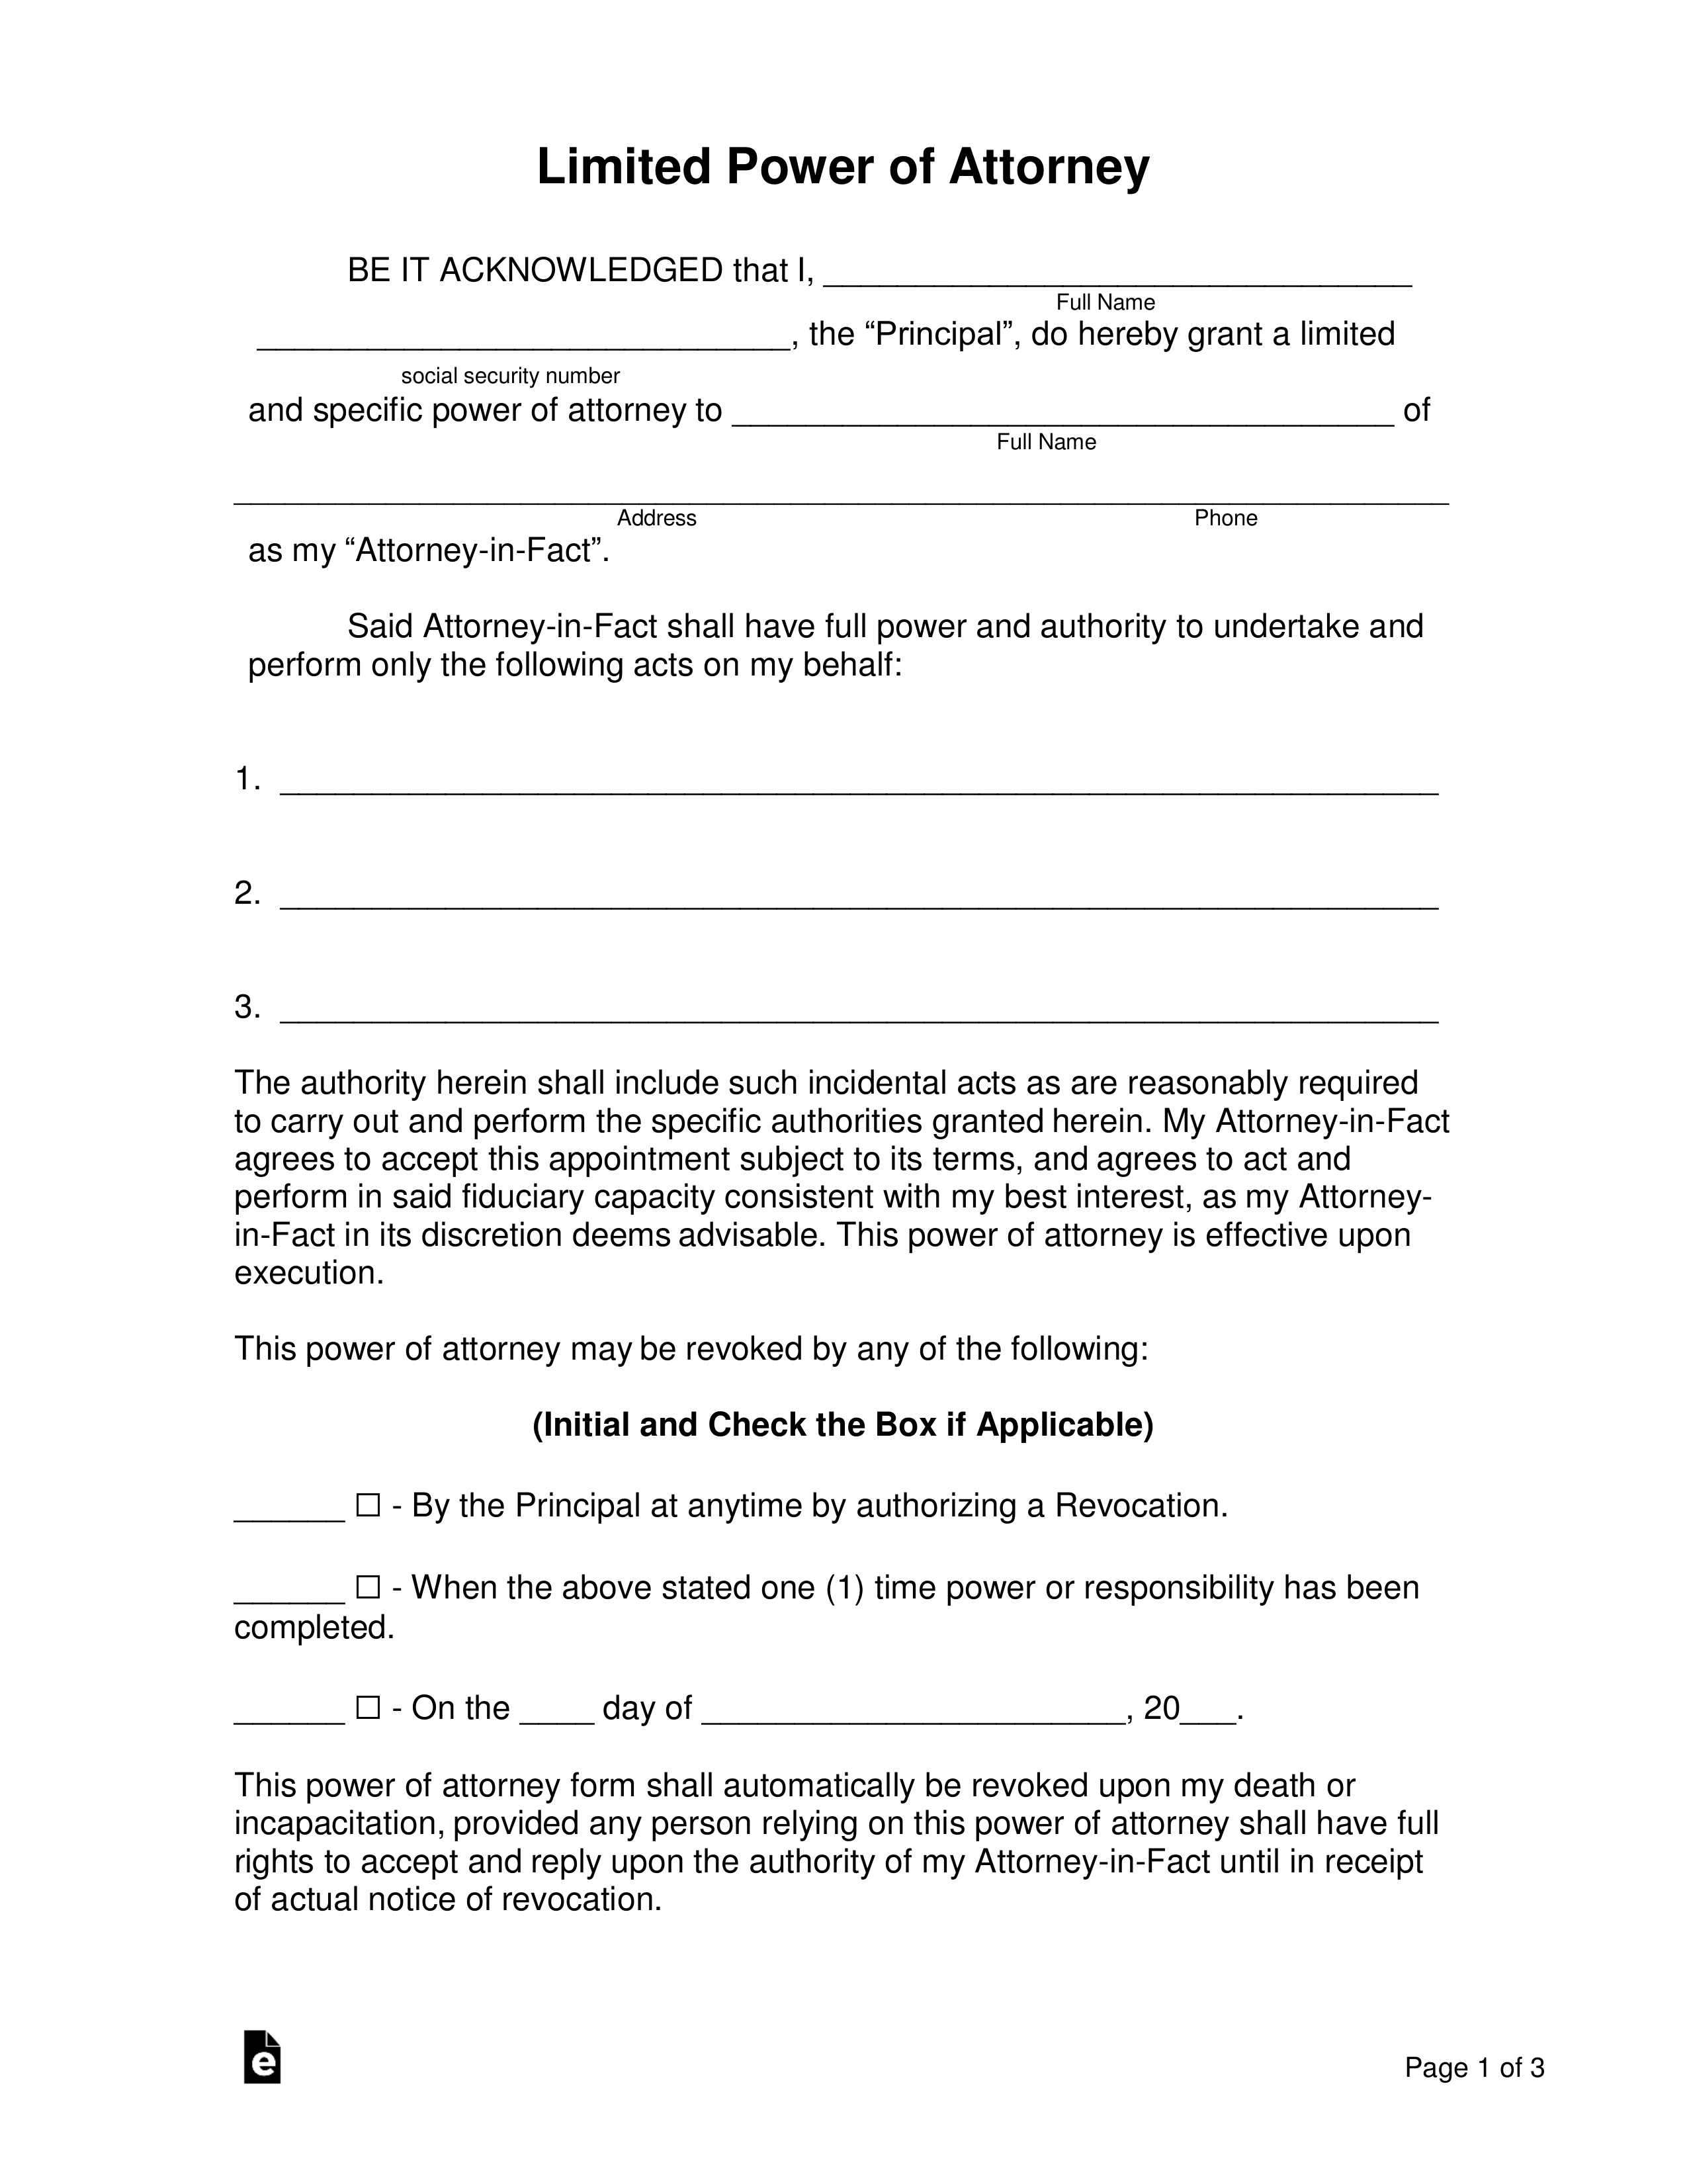 power of attorney form europe
 Free Limited (Special) Power of Attorney Forms - PDF | Word ...